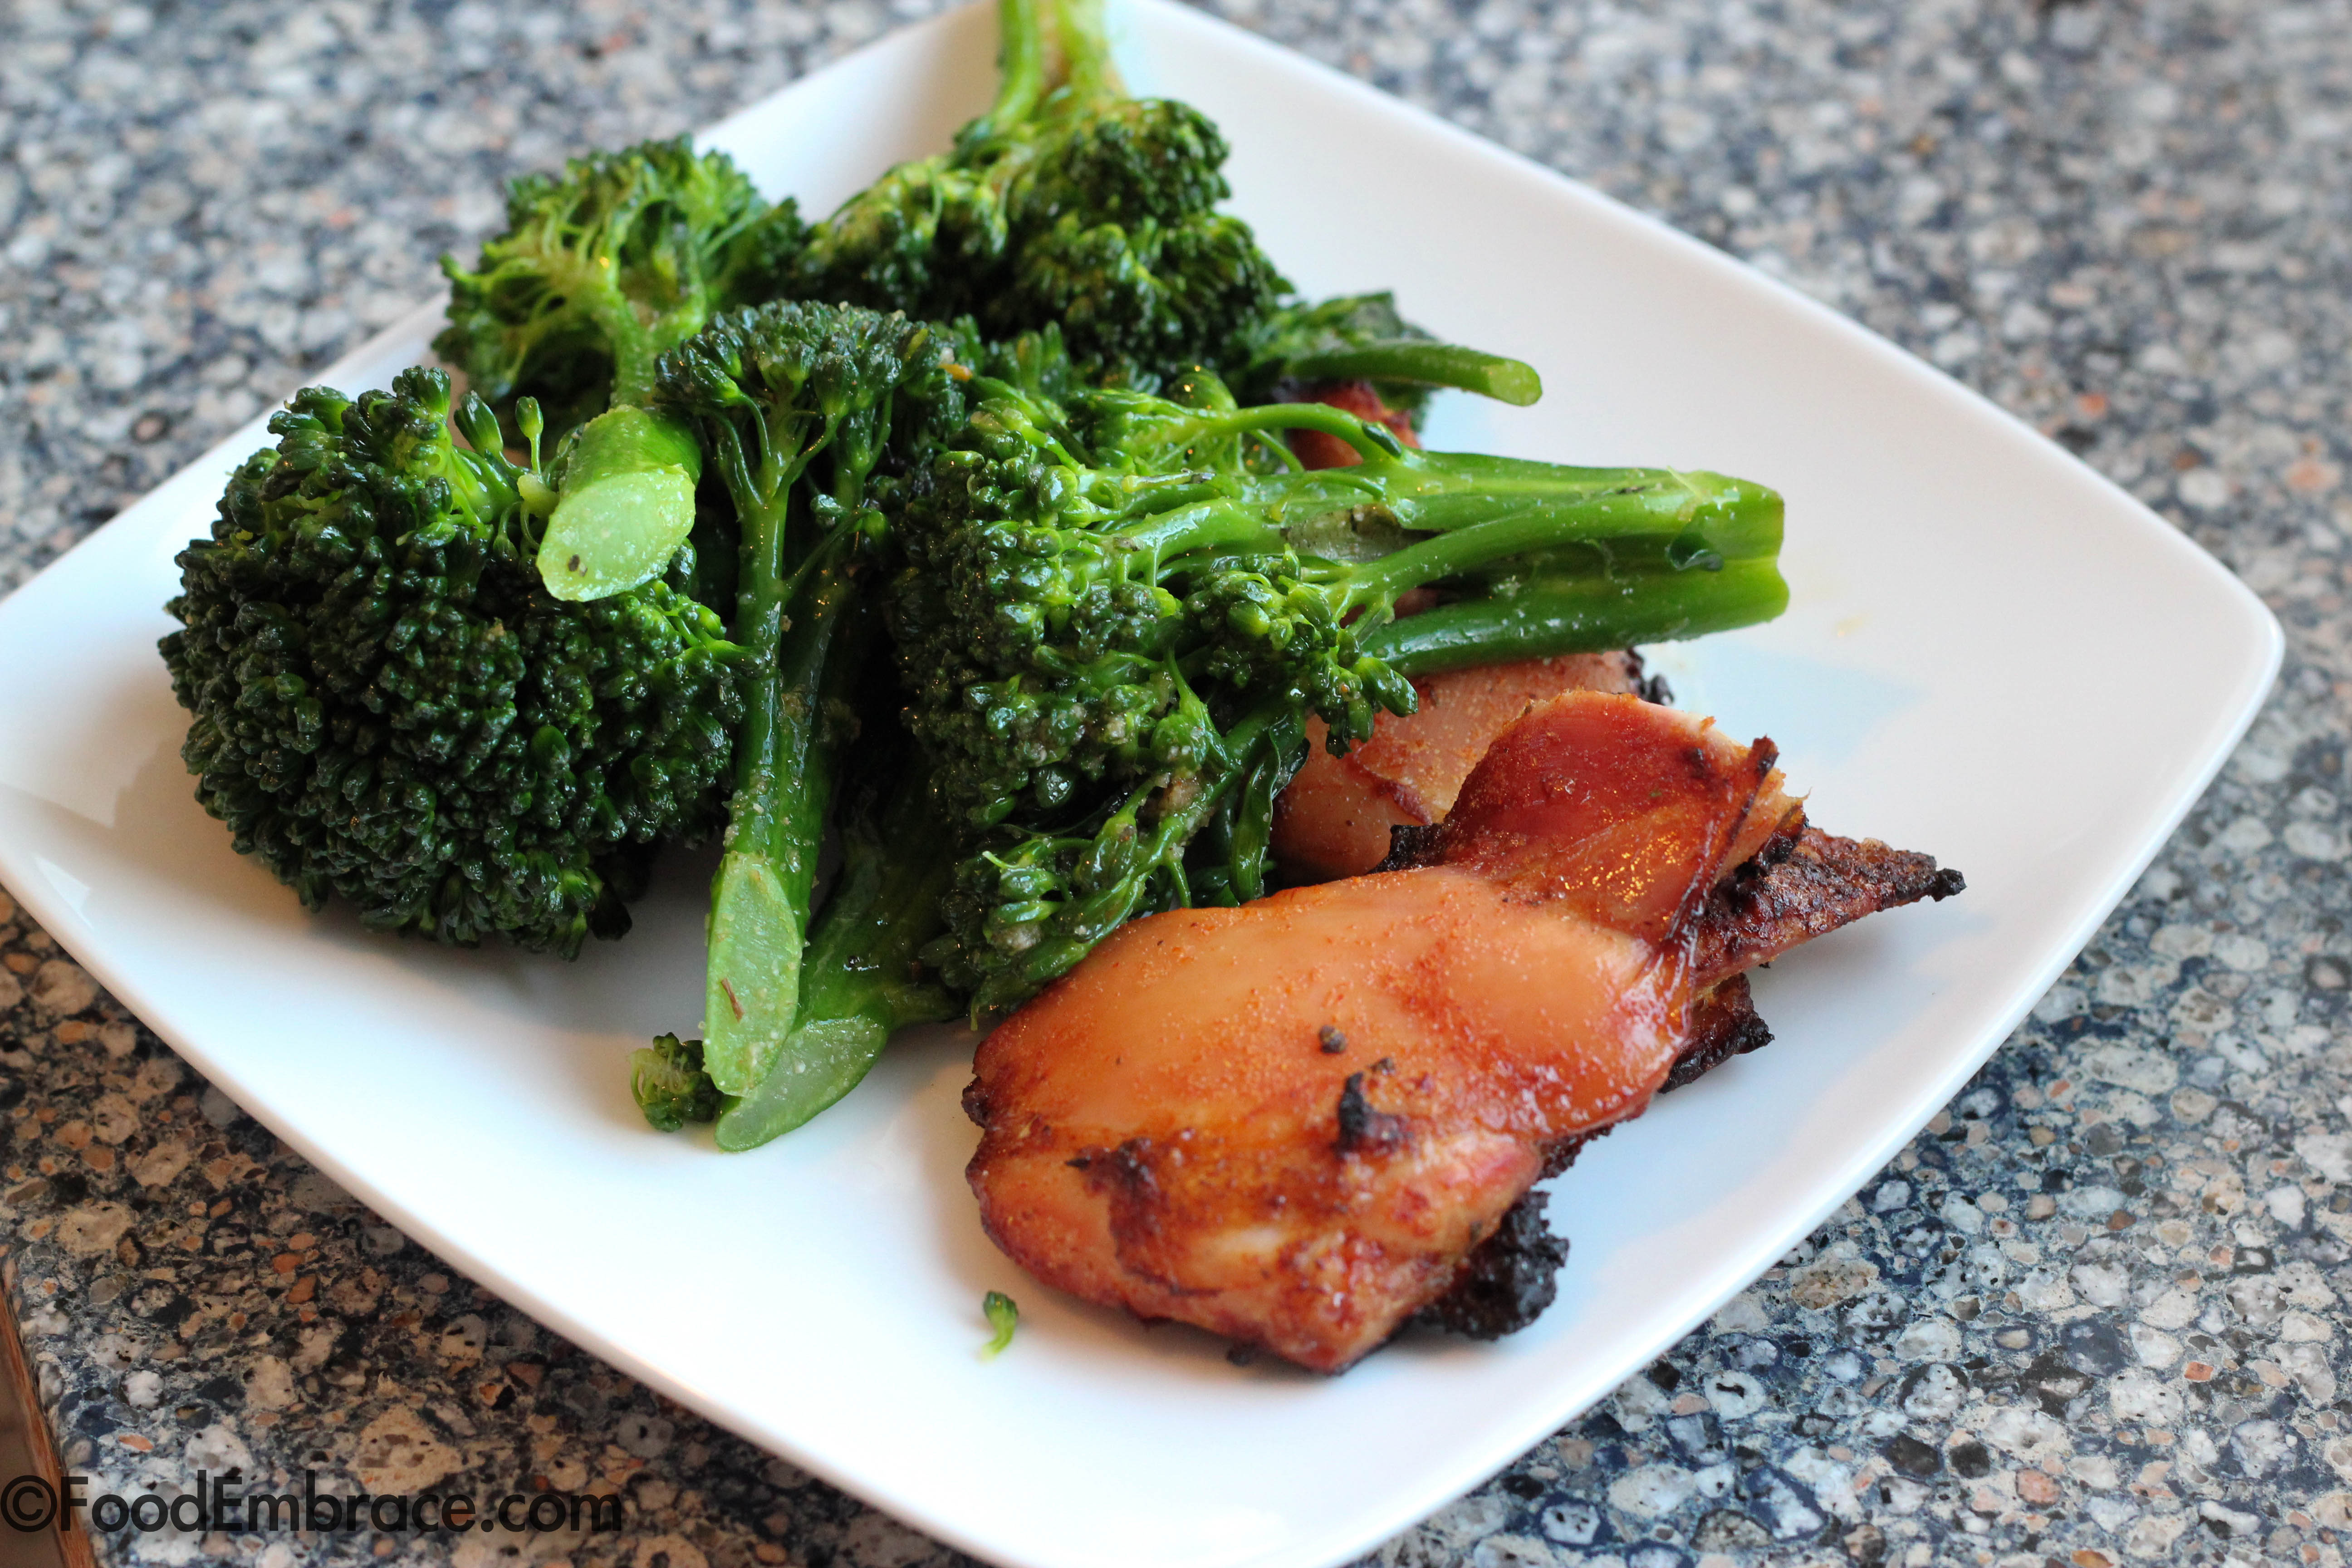 Chicken thighs and broccolini